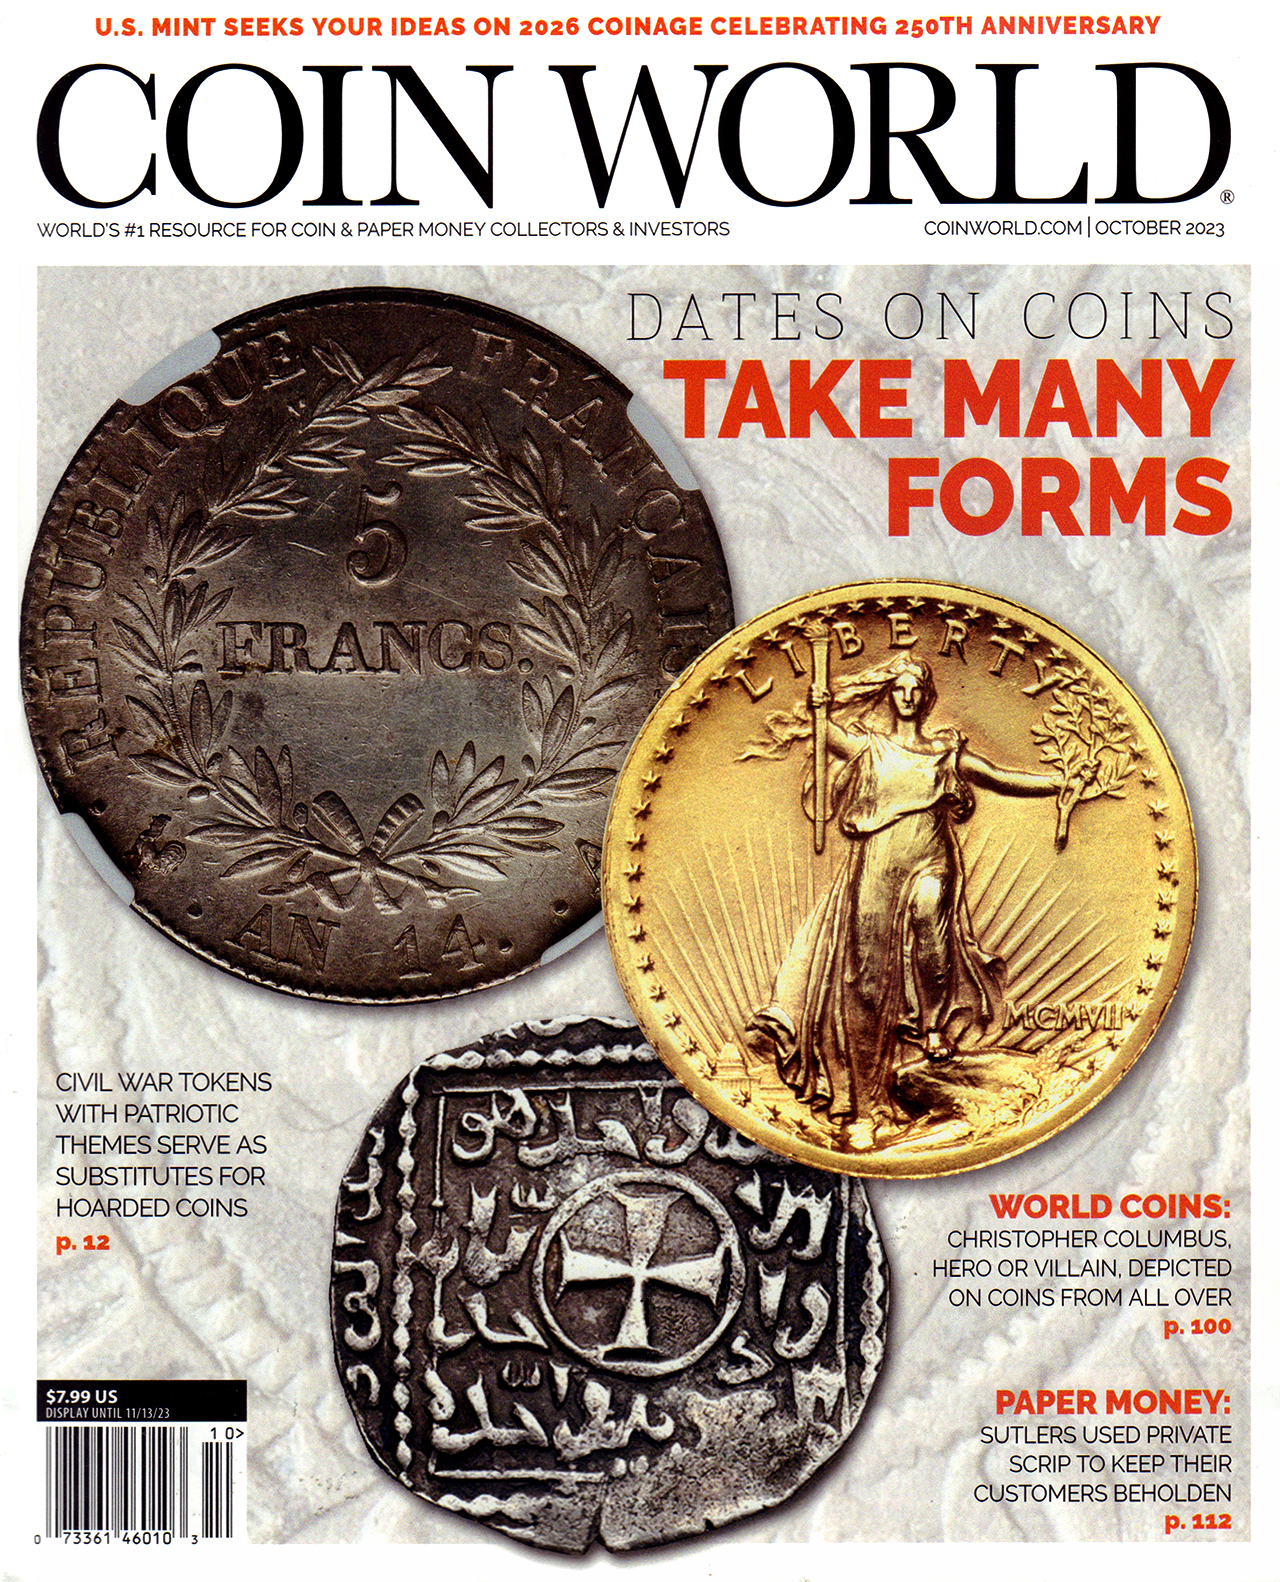 Try Coin World Weekly Risk Free!